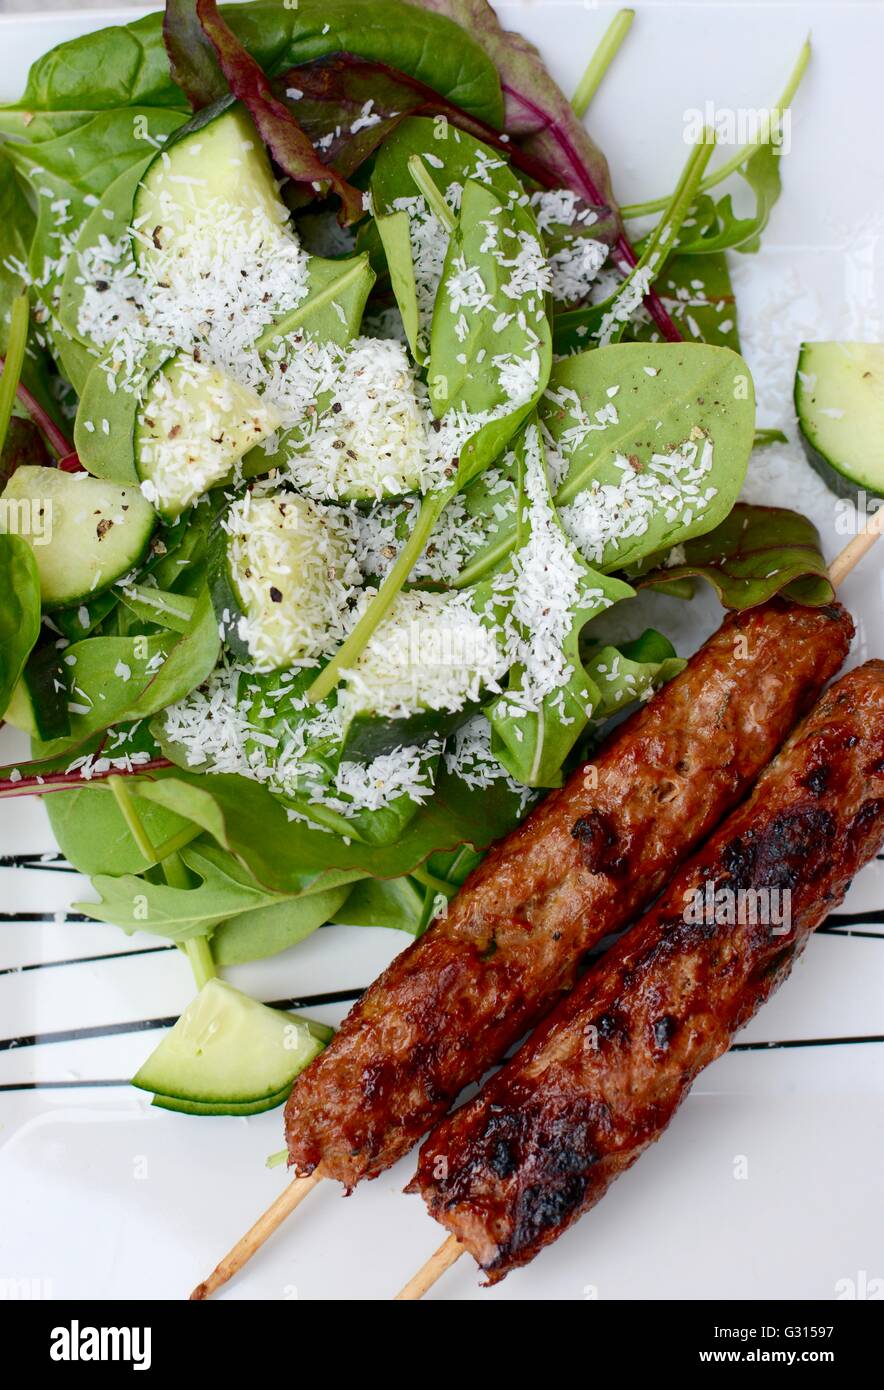 Kebab sticks served with a green salad Stock Photo